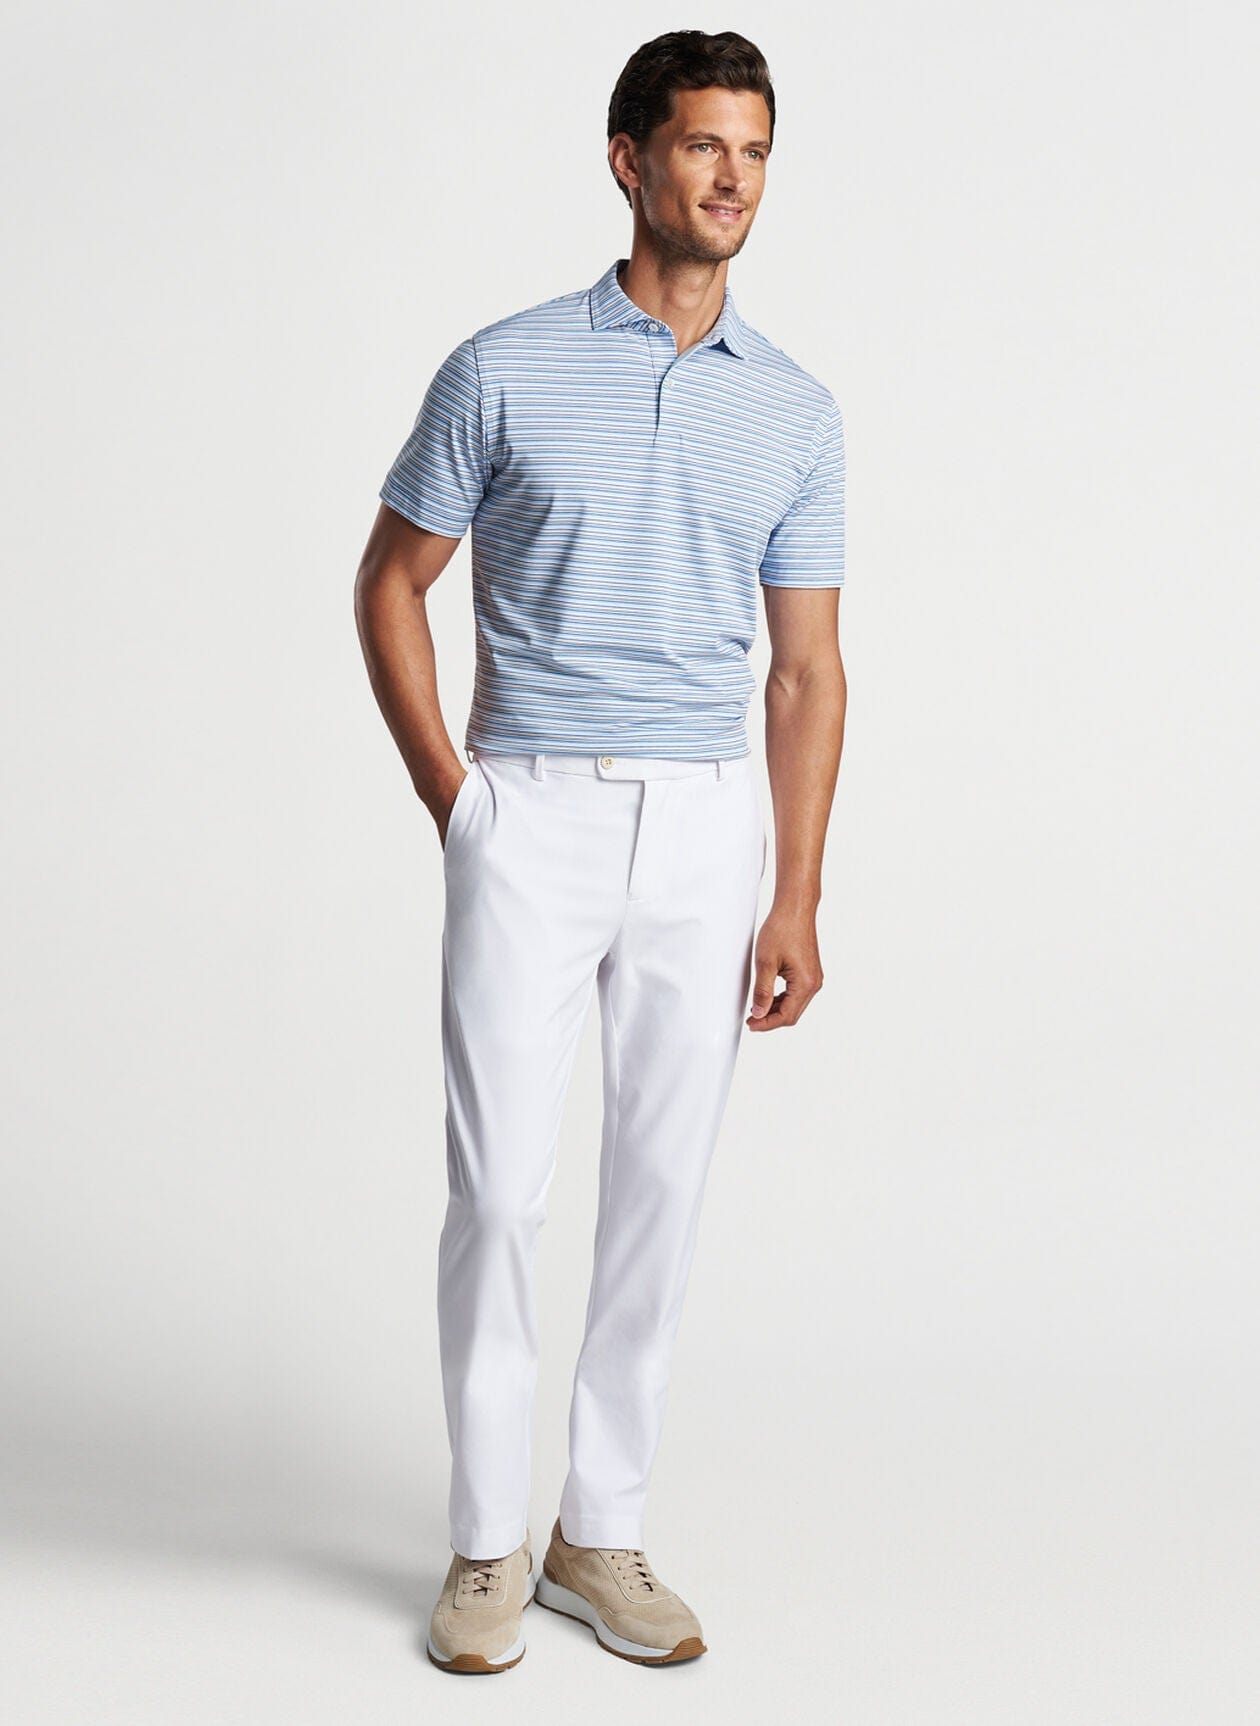 PETER MILLAR SHIRTS - POLO OCTAVE PERFORMANCE JERSEY POLO